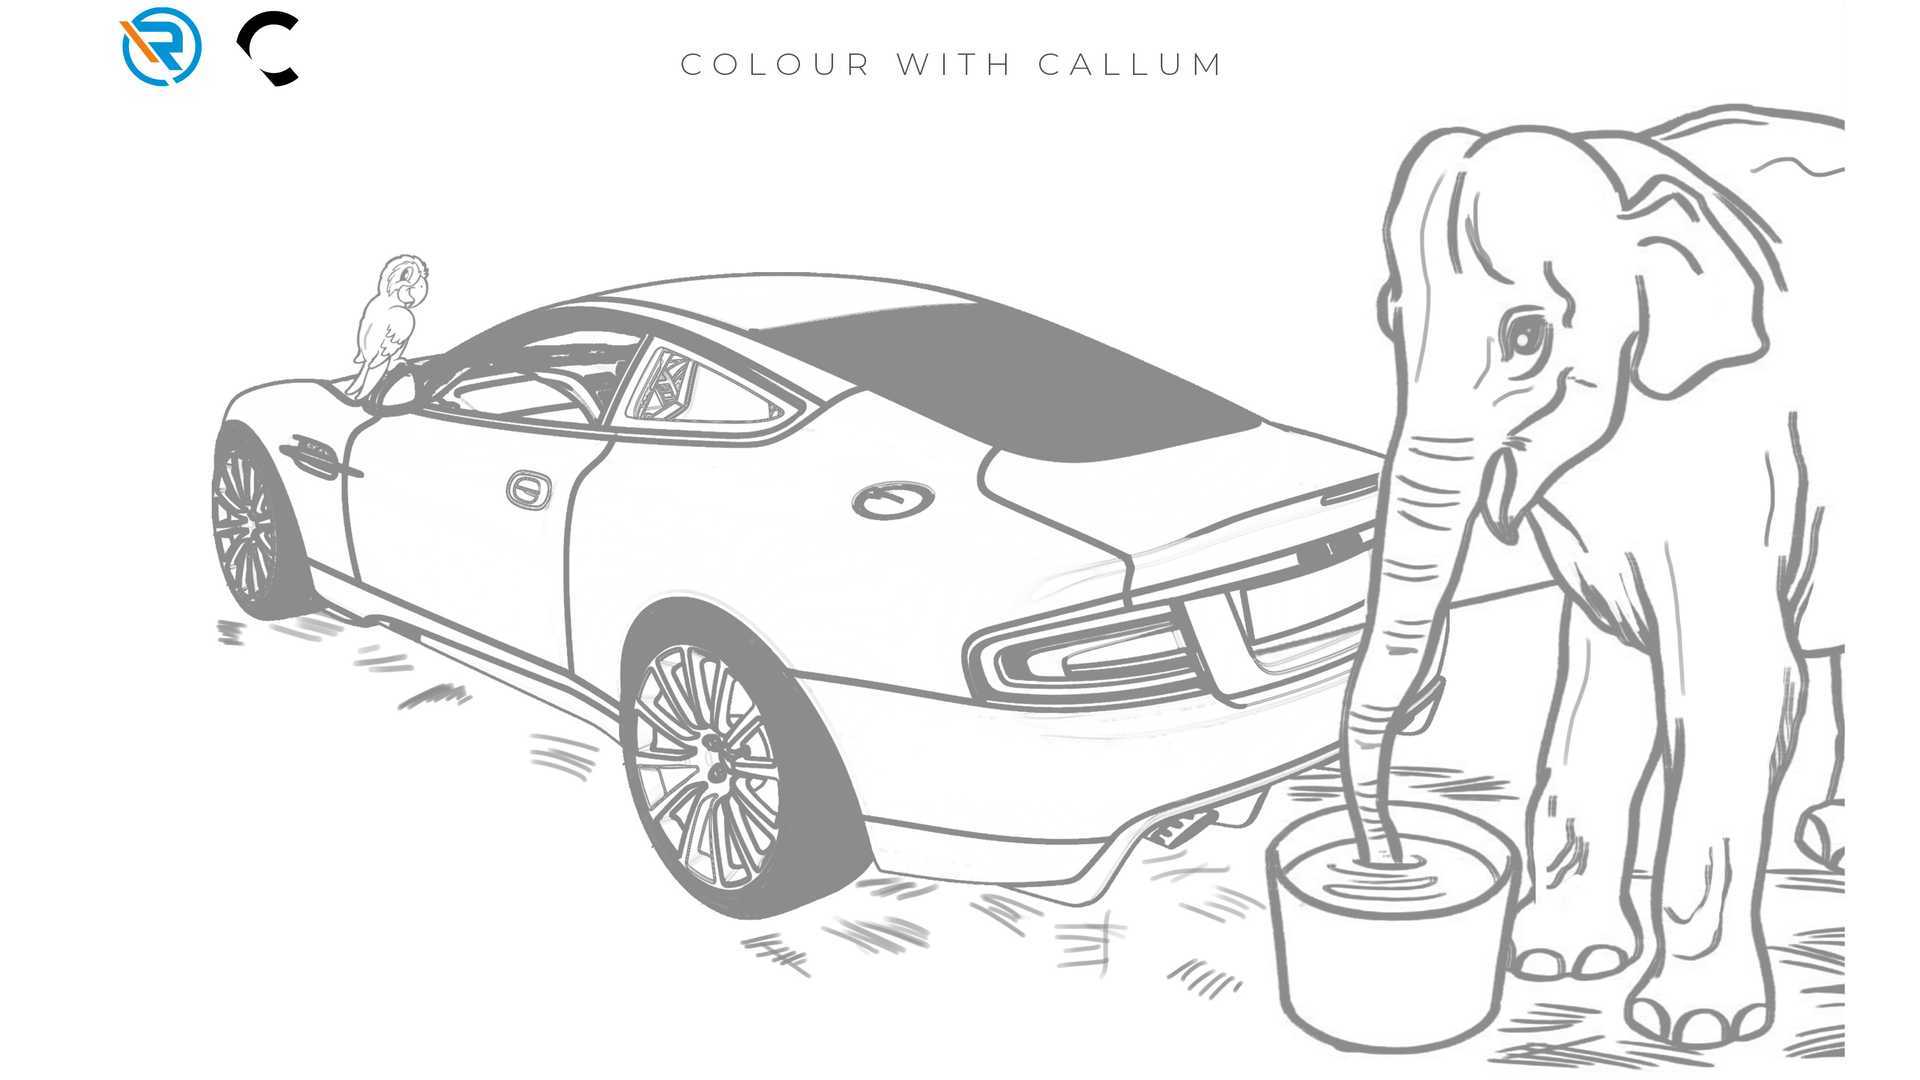 Famous aston martin design available for quarantined kids to color